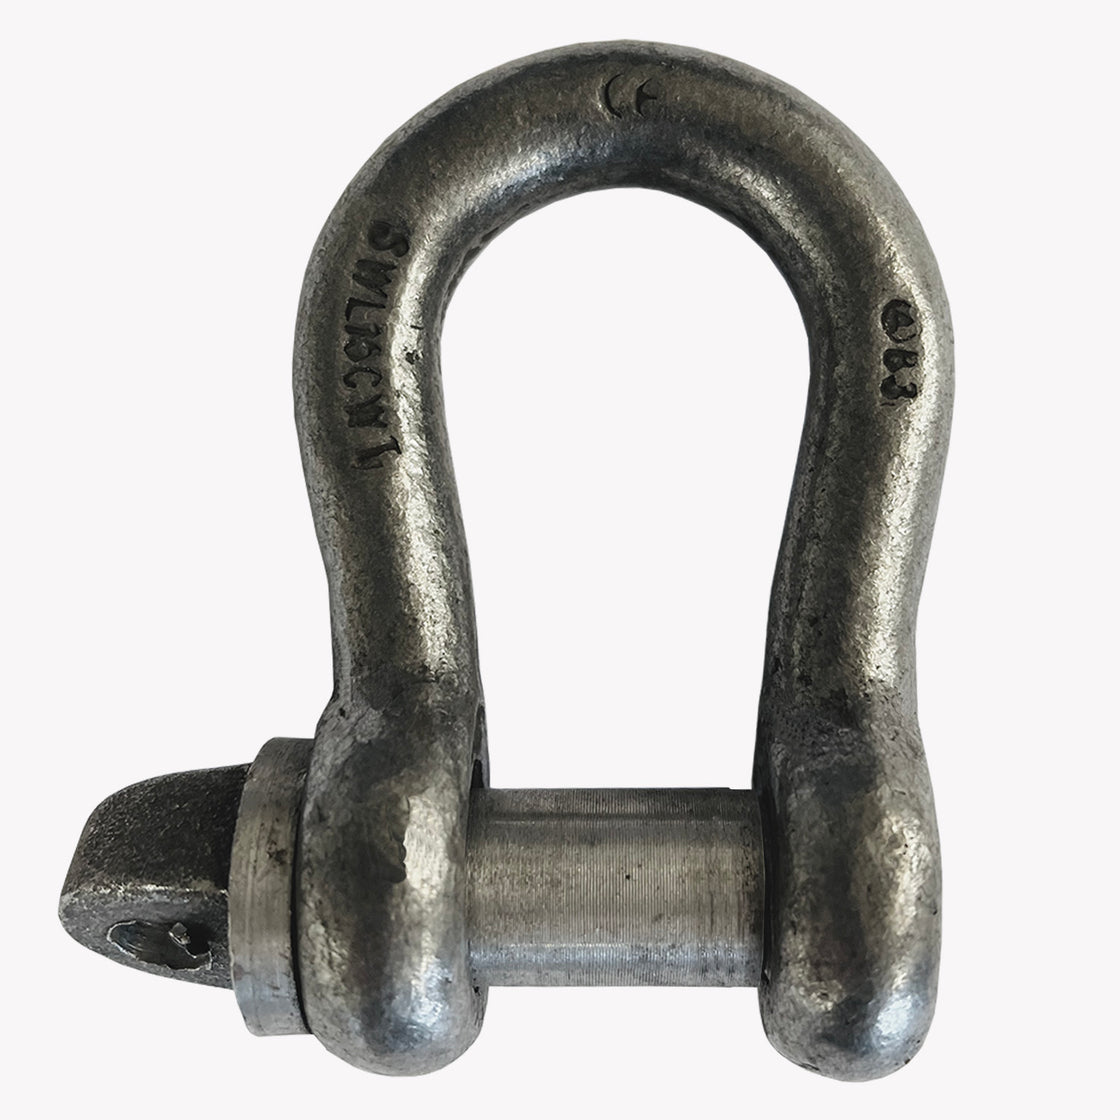 BS3032 SMALL BOW SHACKLE - BRITISH STANDARD (TABLE 4) - PGS Supplies 21 Ltd